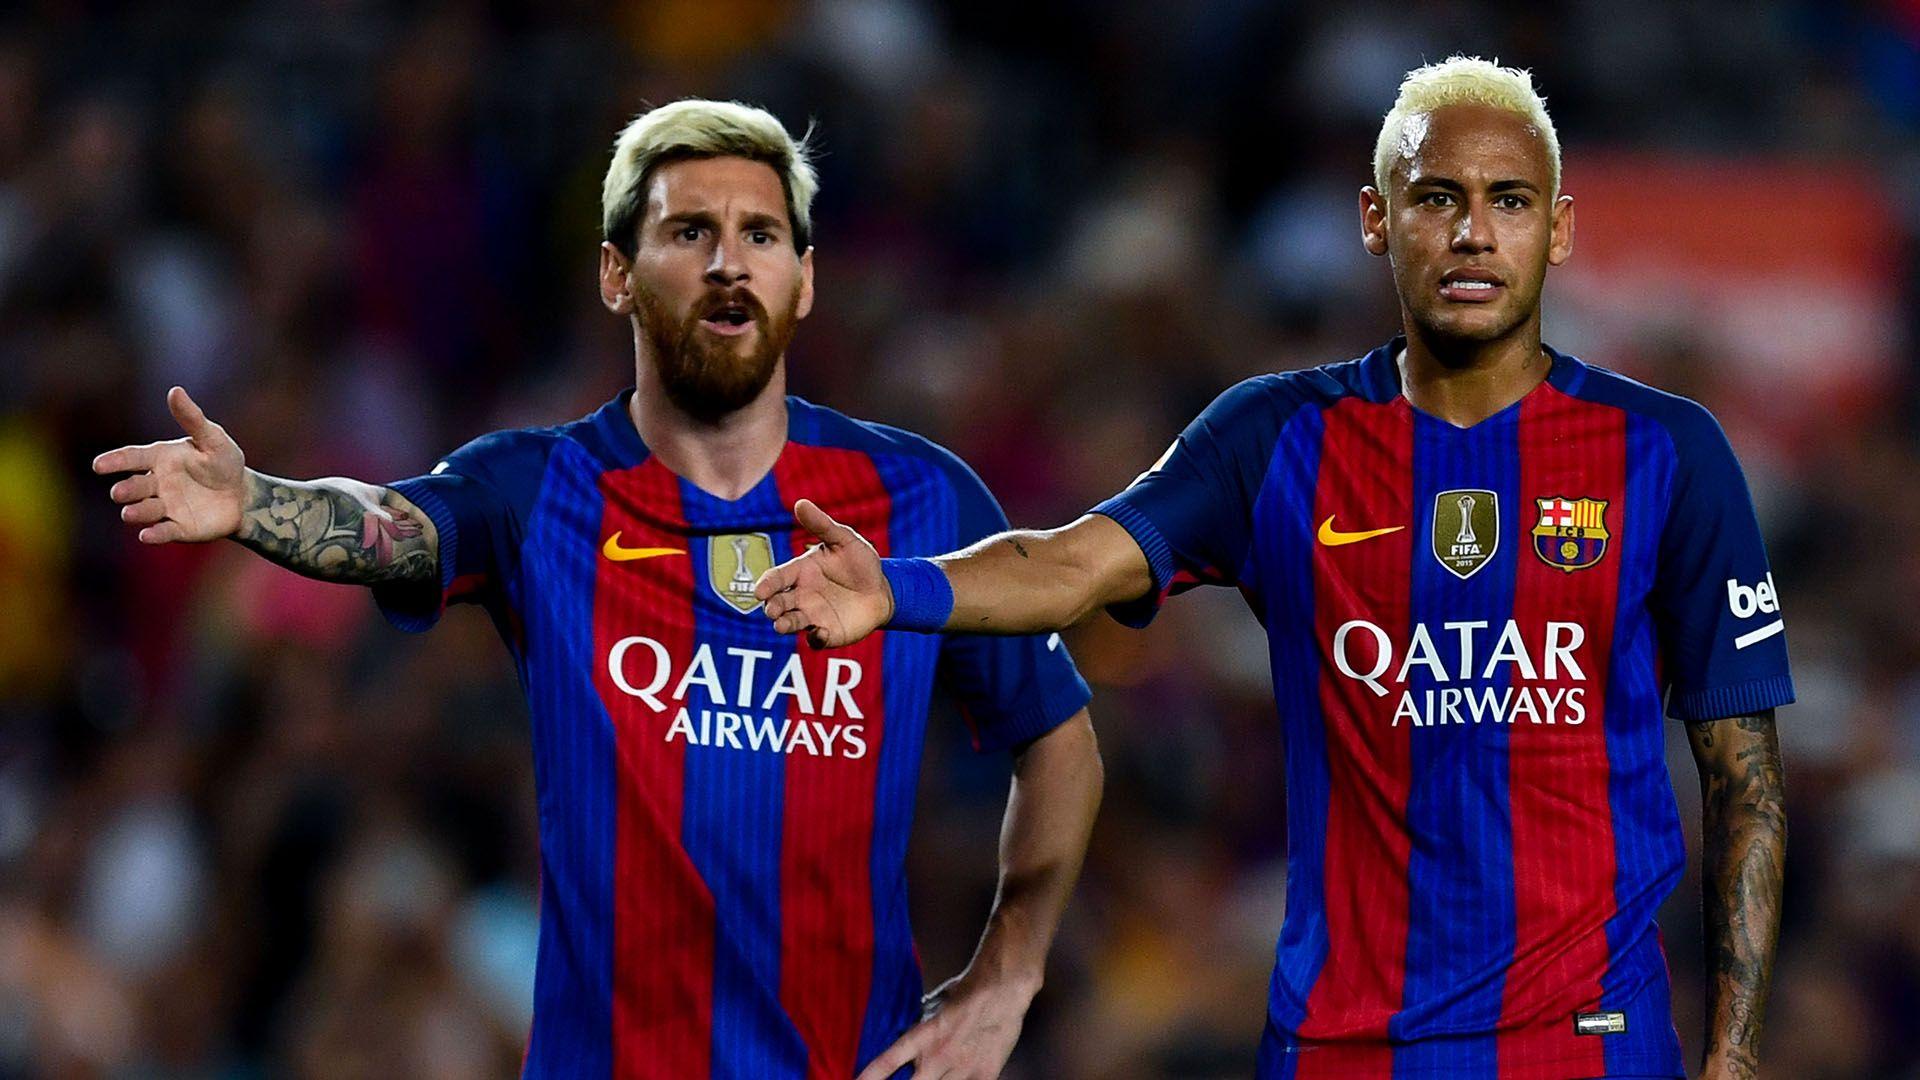 He's not far from Messi and Ronaldo' tips Neymar to be